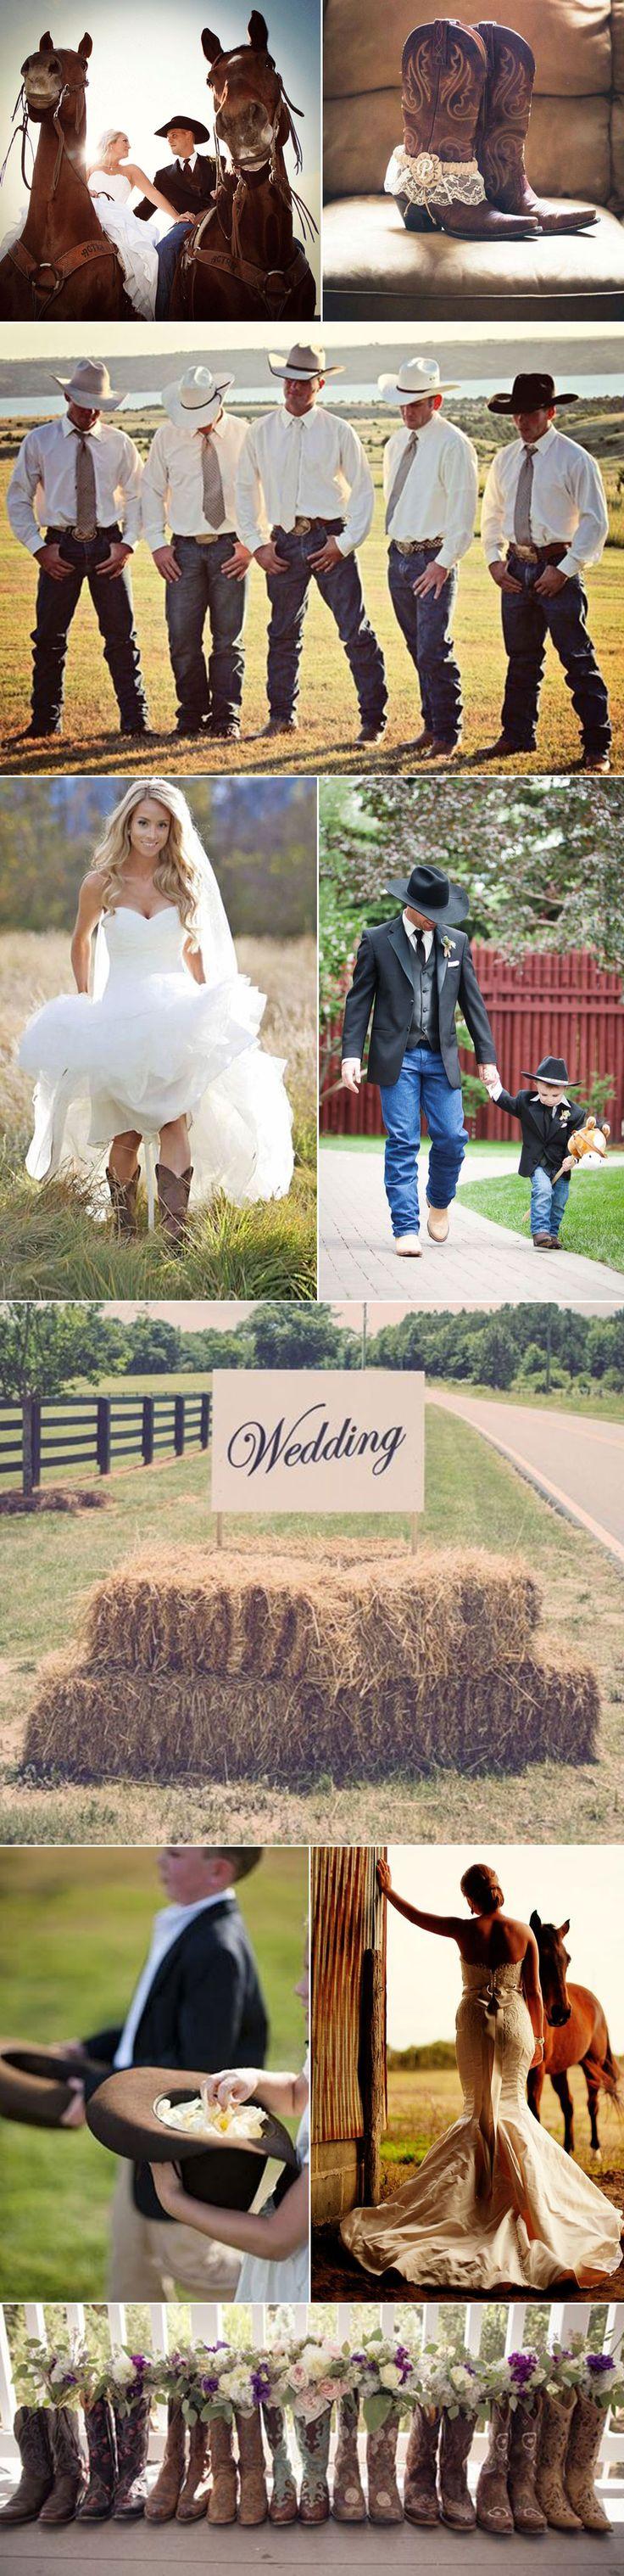 Wedding - Inspiration For Country Western Weddings   